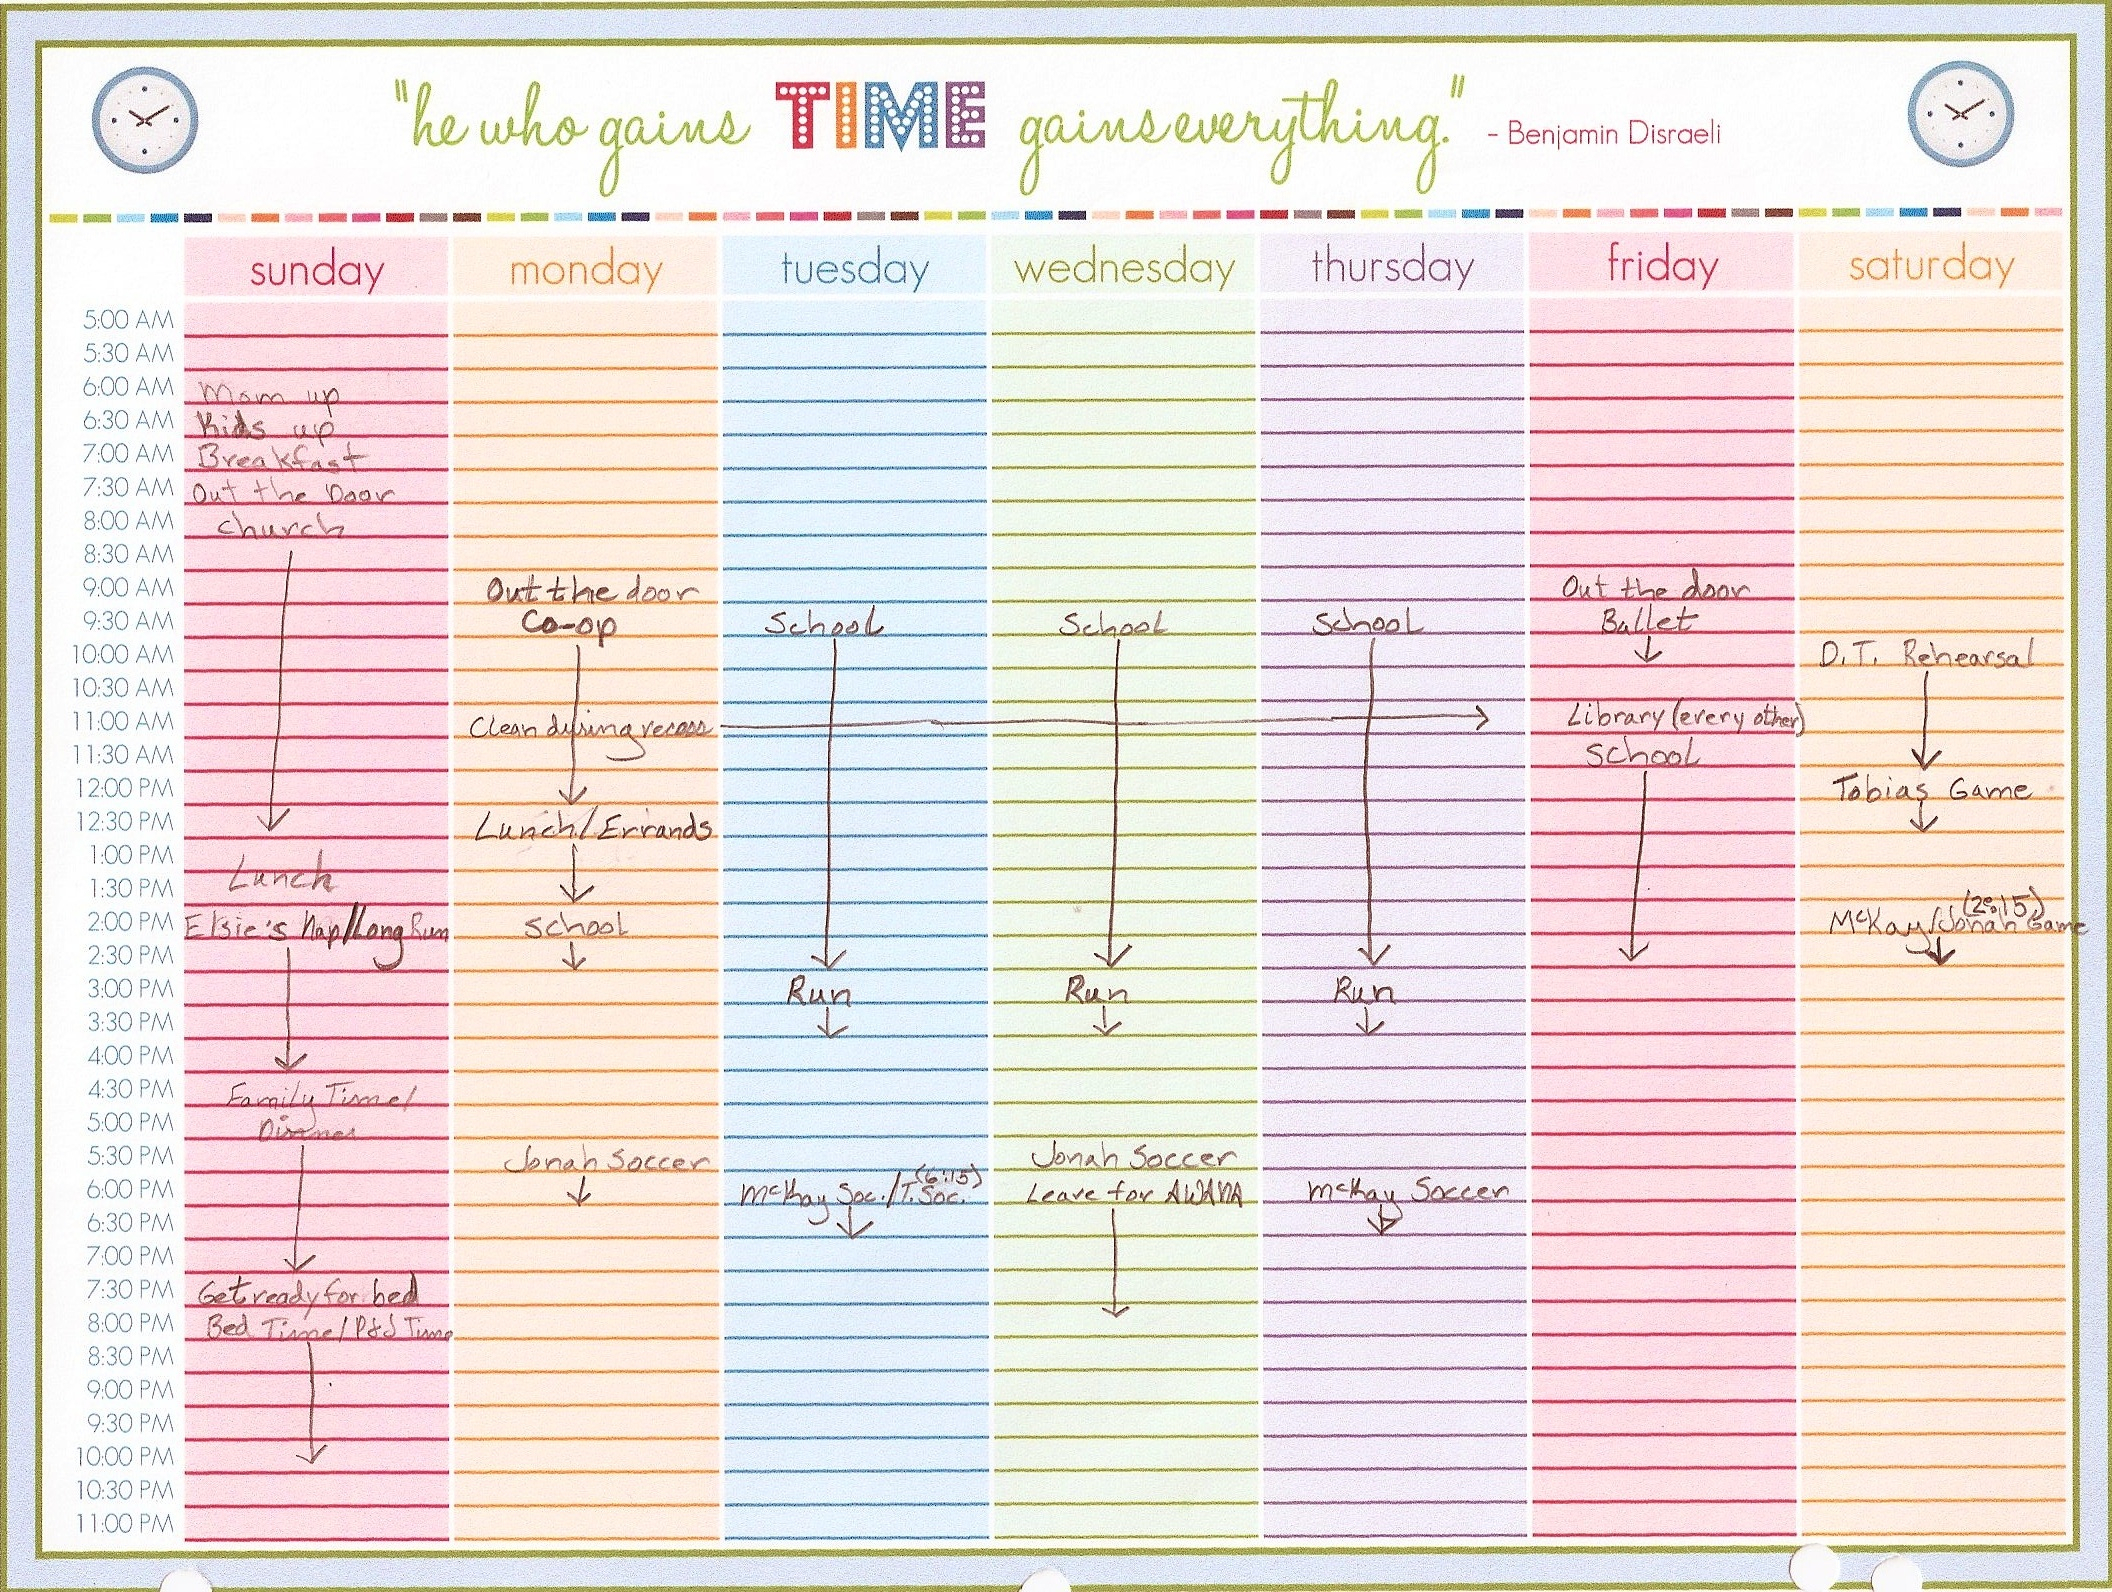 Free Calendar Template With Time Slots | Calendar Template in Weekly Calendar Template With Time Slots